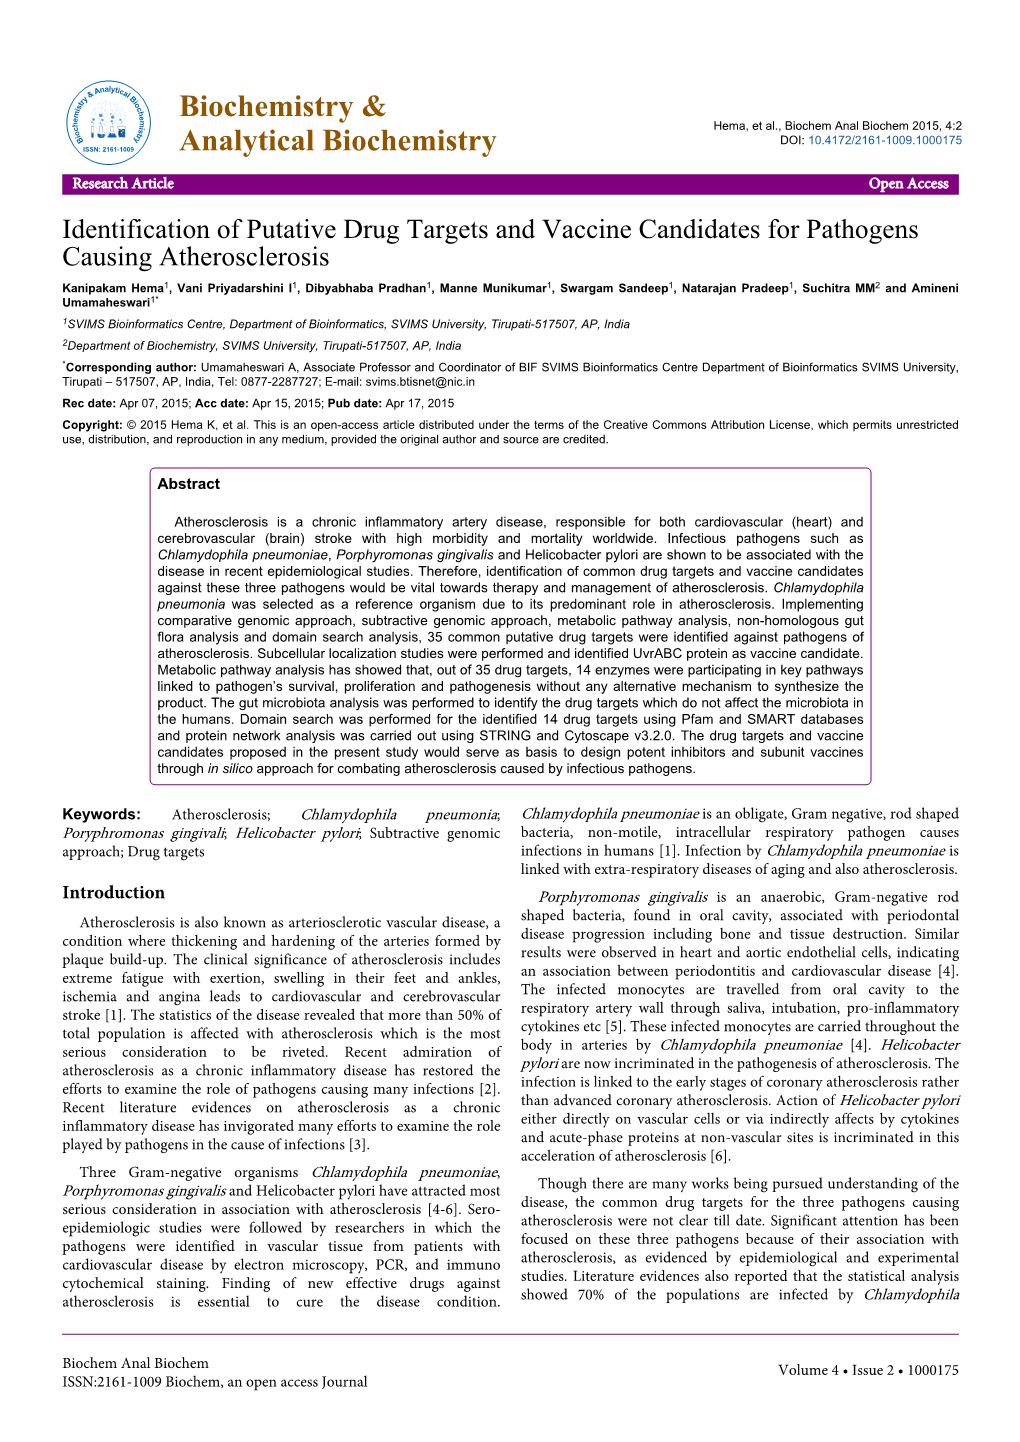 Identification of Putative Drug Targets and Vaccine Candidates For